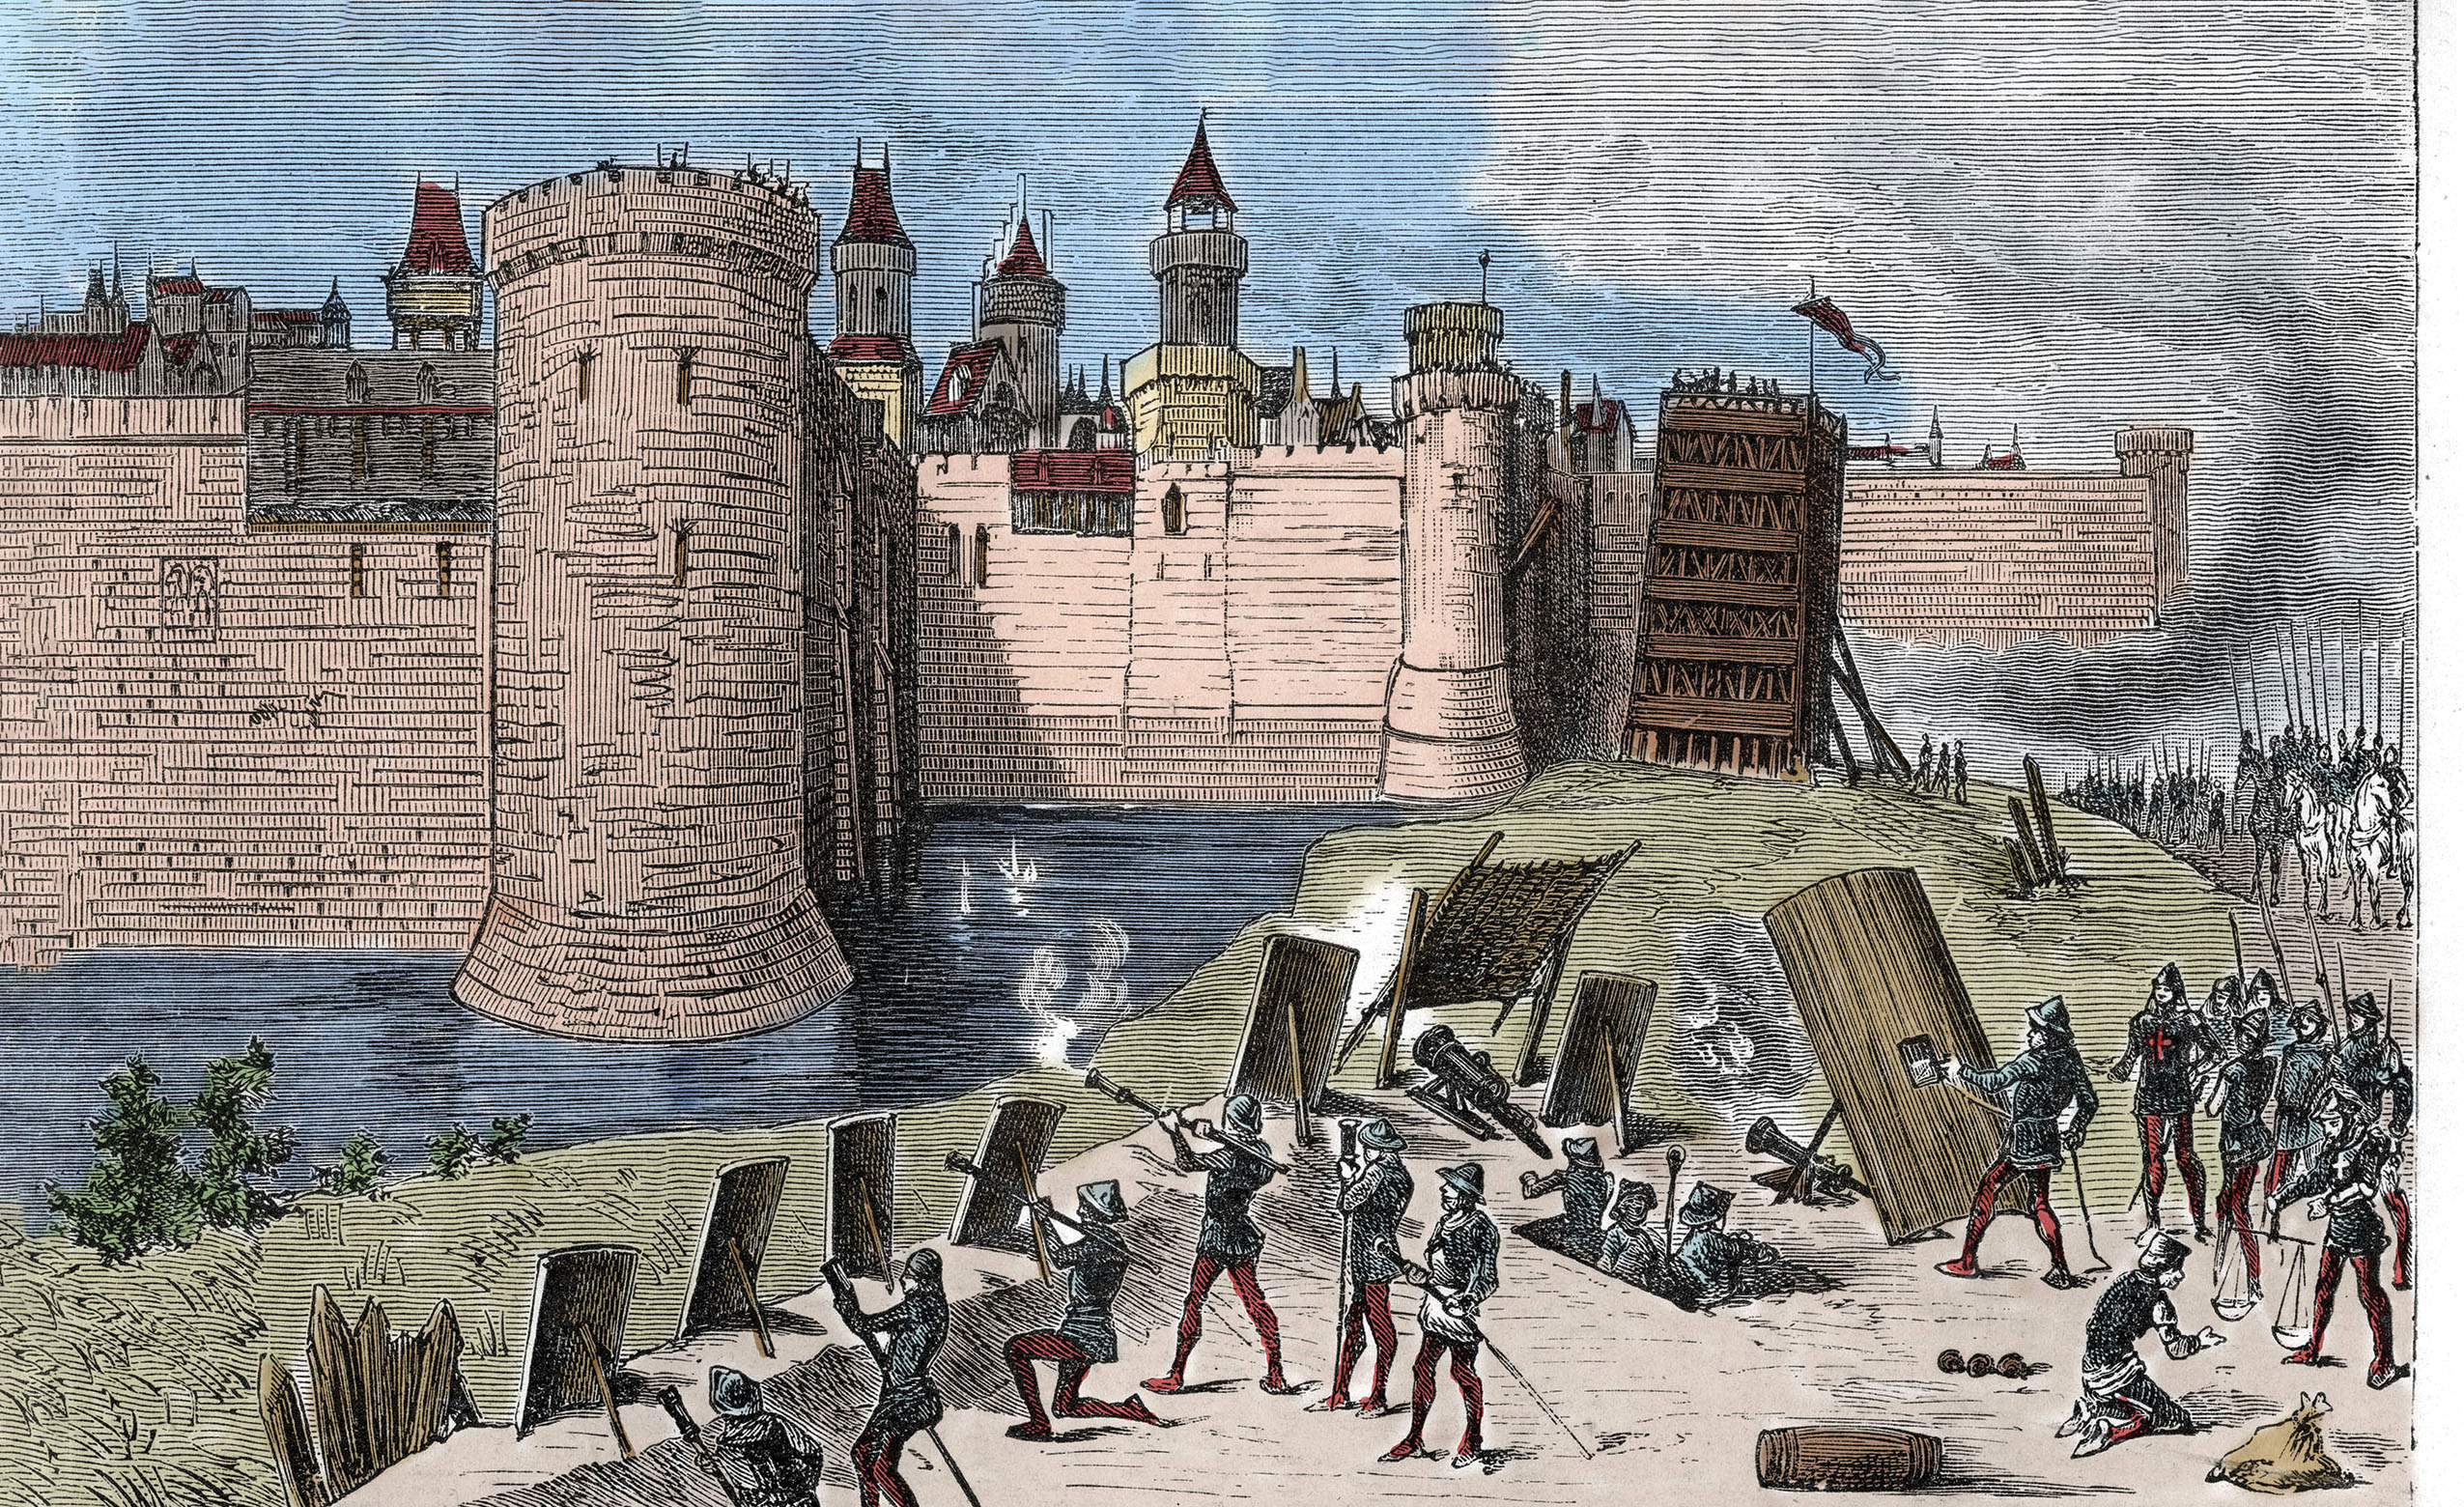 After defeating the French at Crécy, English troops under King Edward III employ hand cannons and bombards alongside traditional weapons of the medieval period during the successful 1346–47 siege of Calais. / Bridgeman Images